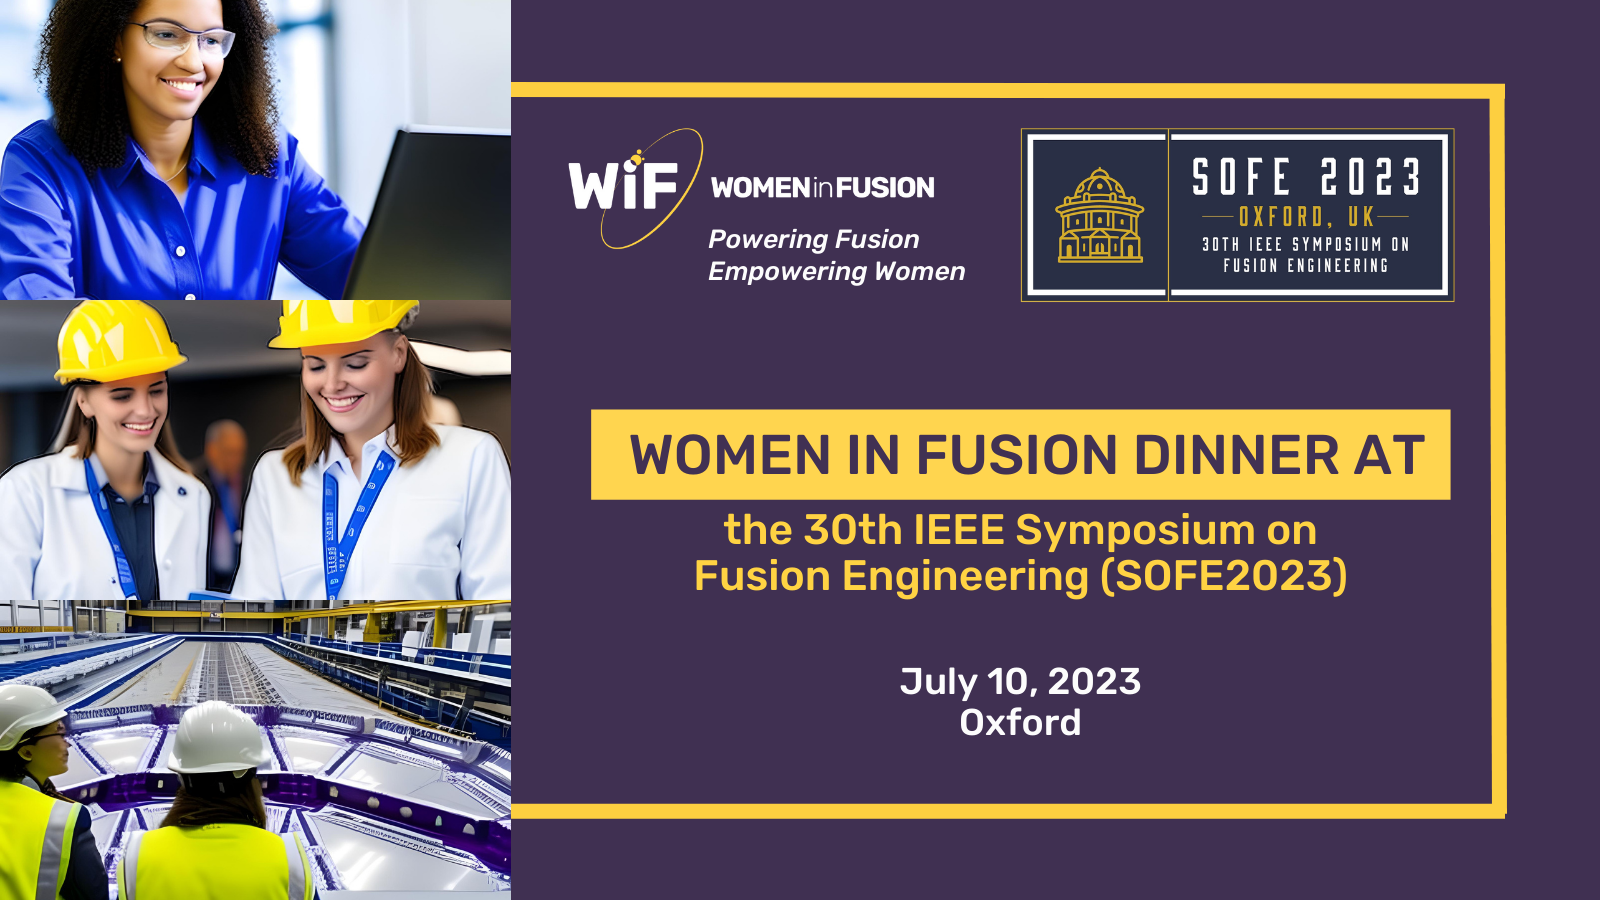 “WOMEN IN FUSION” DINNER AT THE 30TH IEEE SYMPOSIUM ON FUSION ENGINEERING (SOFE2023)